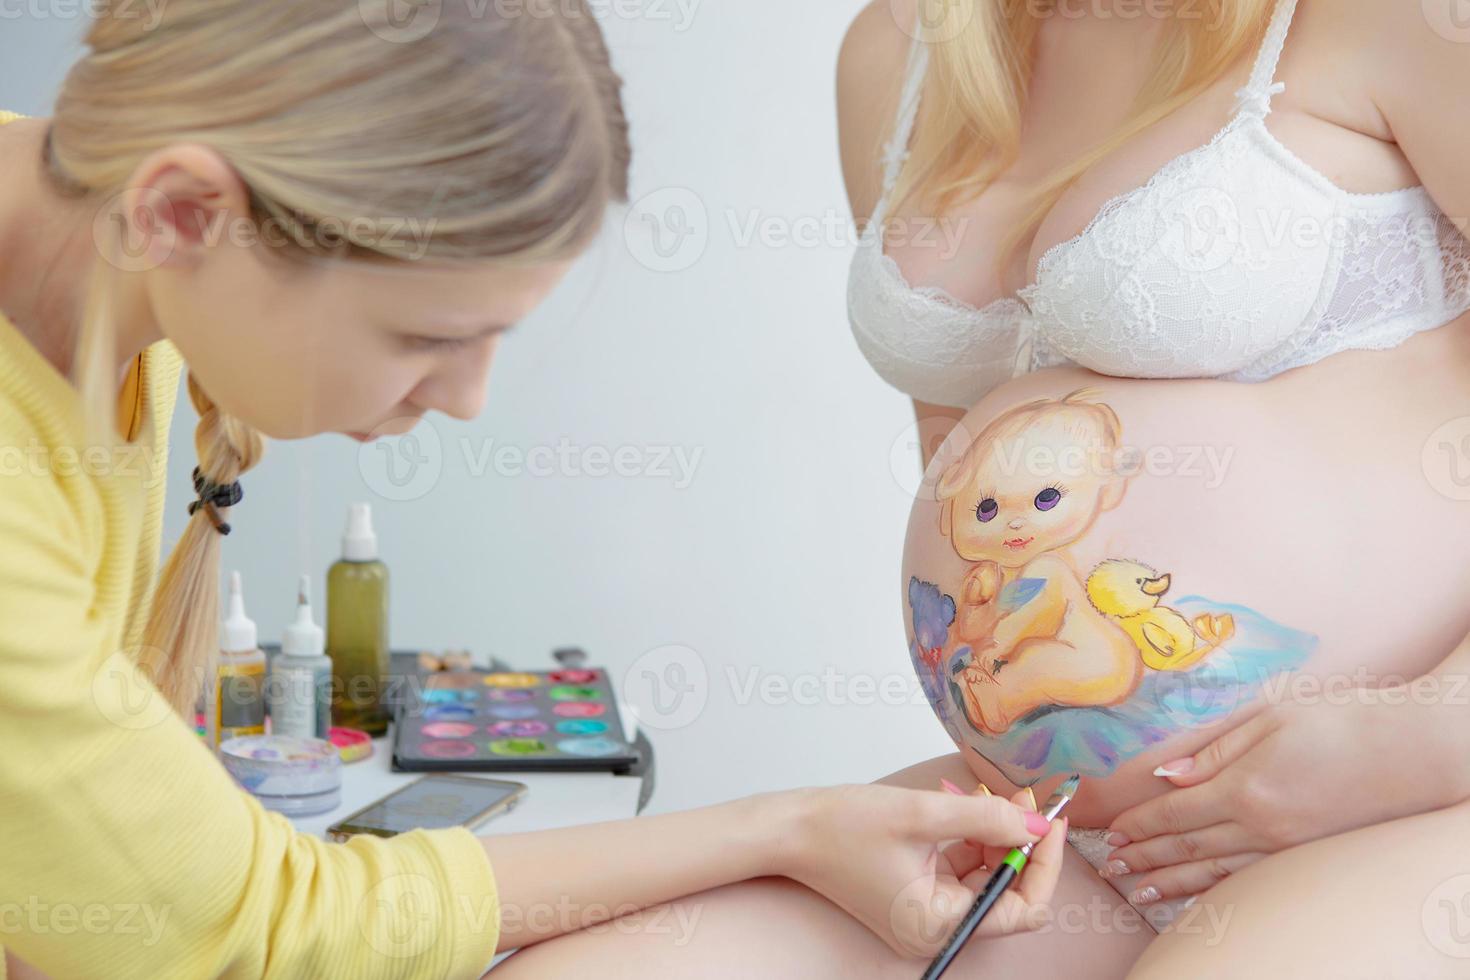 Charming makeup artist draws a toddler on the belly photo